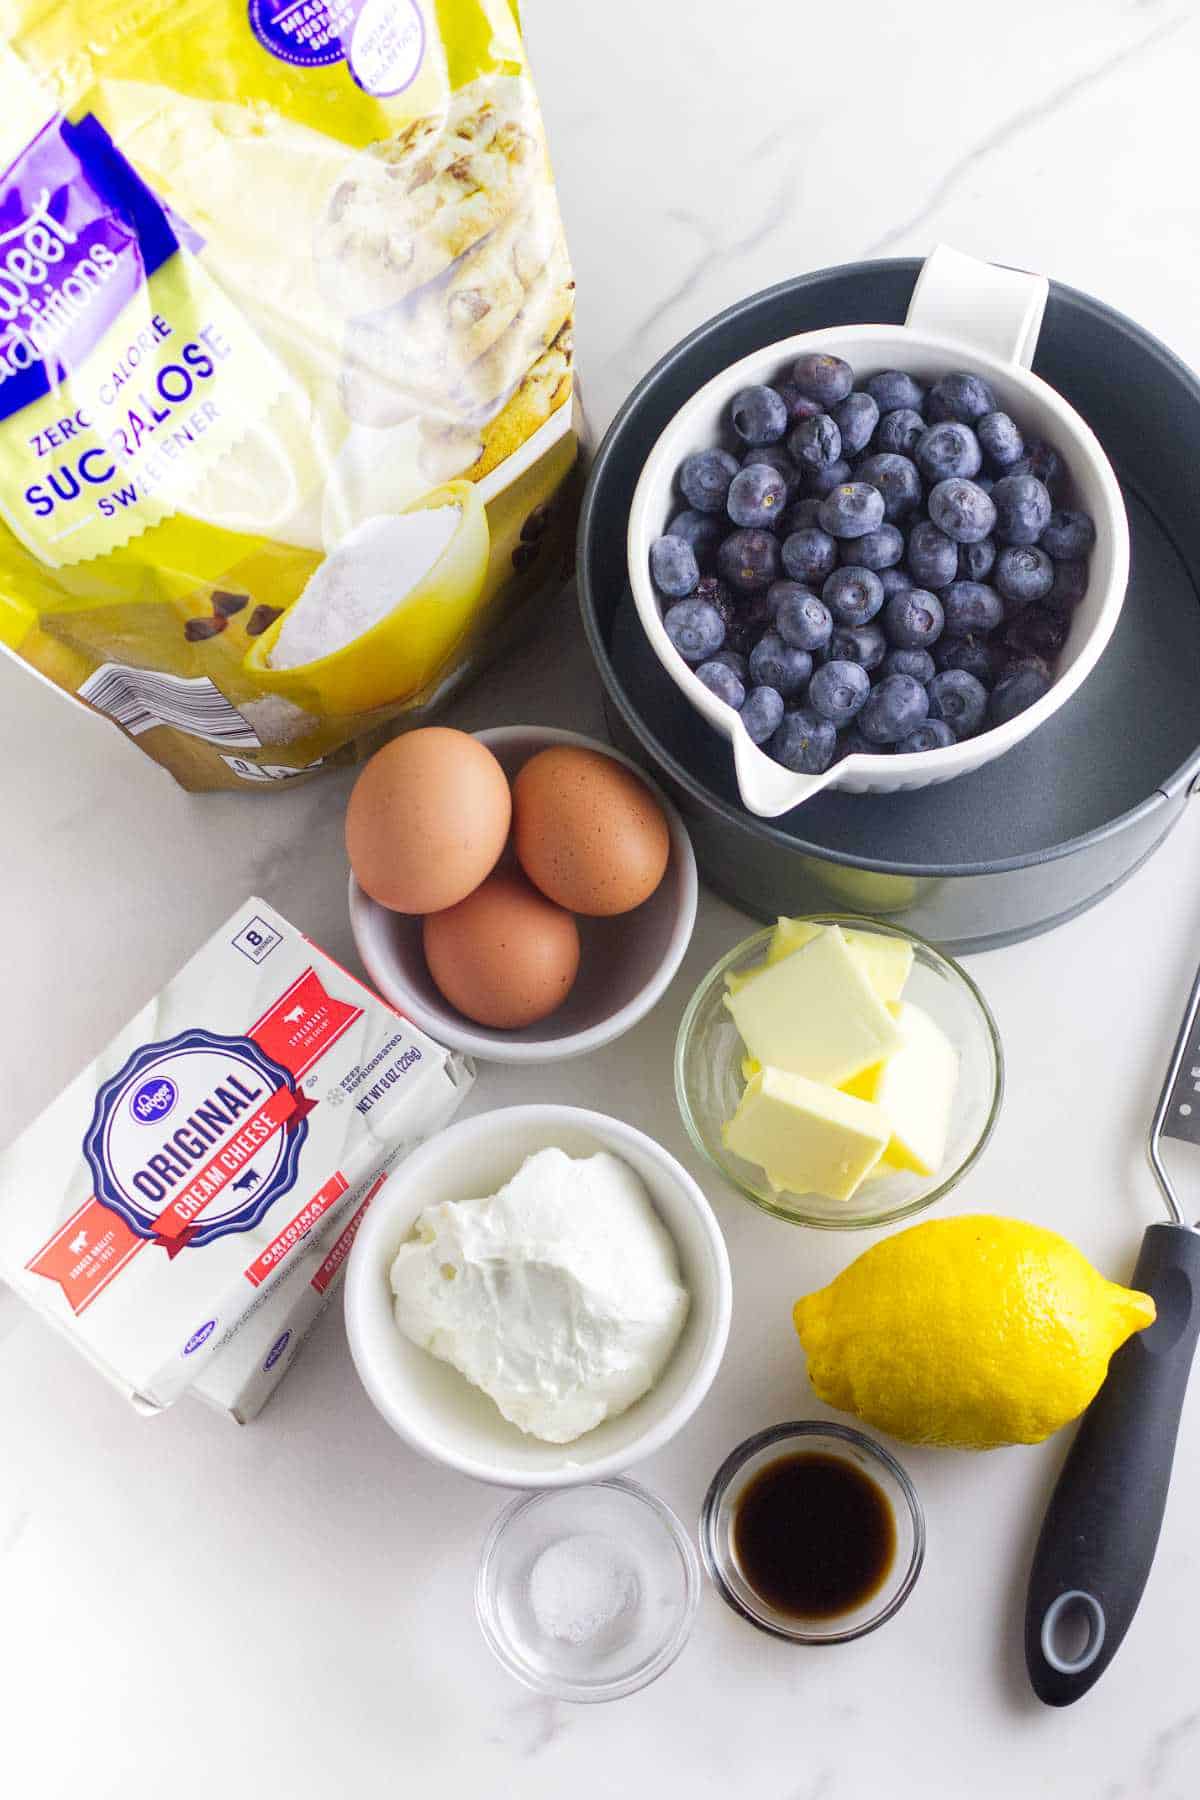 ingredients for cheesecake with blueberries.